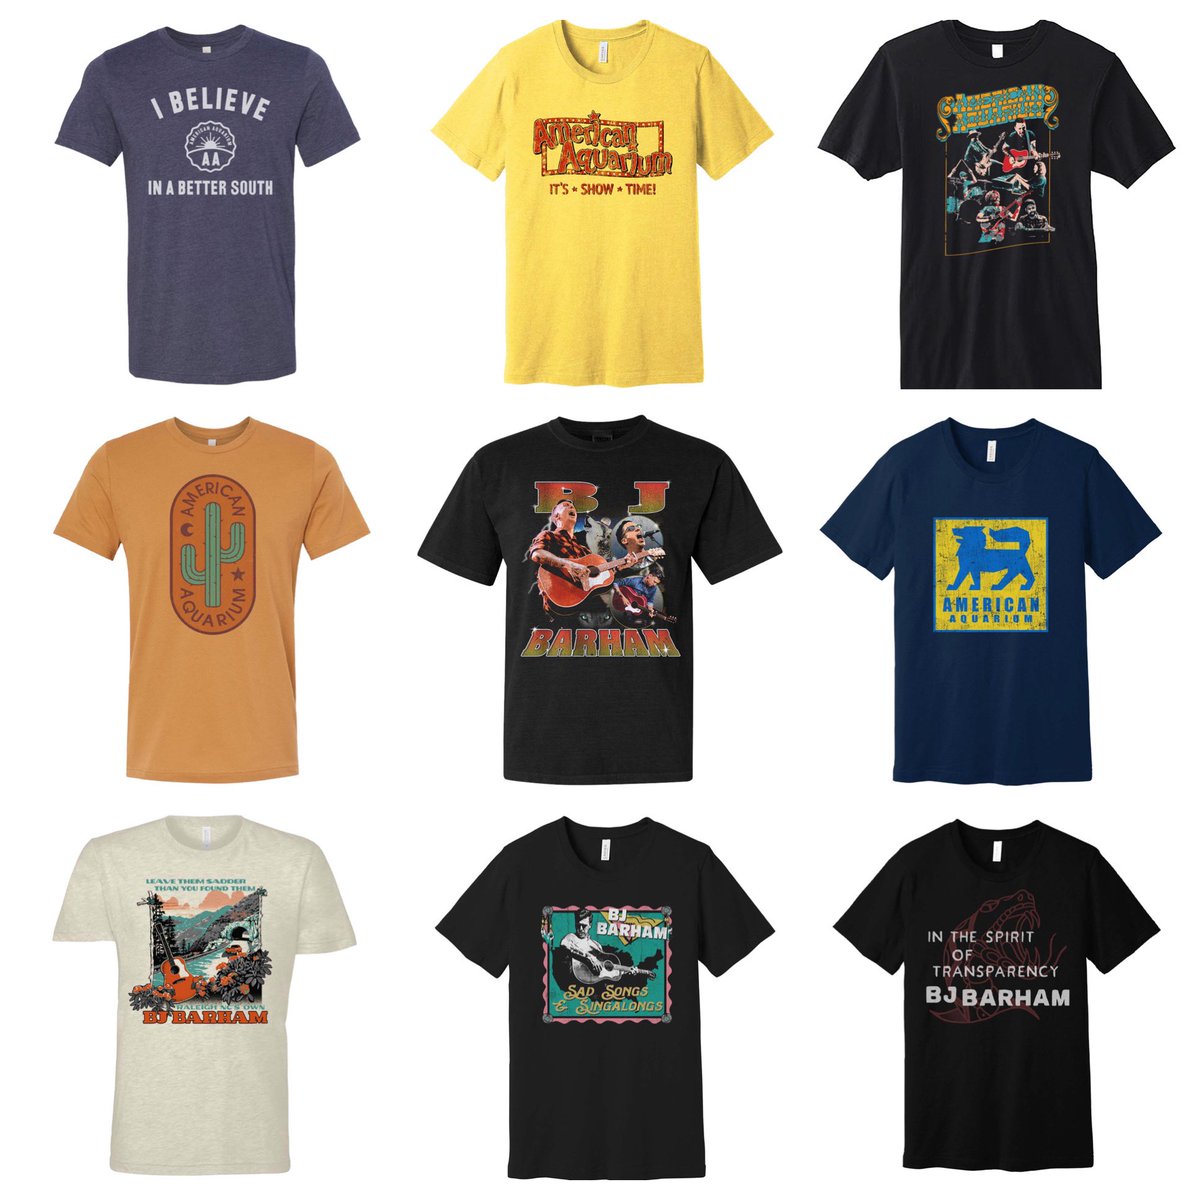 🚨SPRING CLEARANCE SALE🚨 To make way for the new round of merch coming this summer, all of these shirts are now just $15 over at AA dot com. Most styles are available in sizes S-3XL. Grab yourself a fancy new shirt & tag a few like minded fashionistas. americanaquarium.com/store